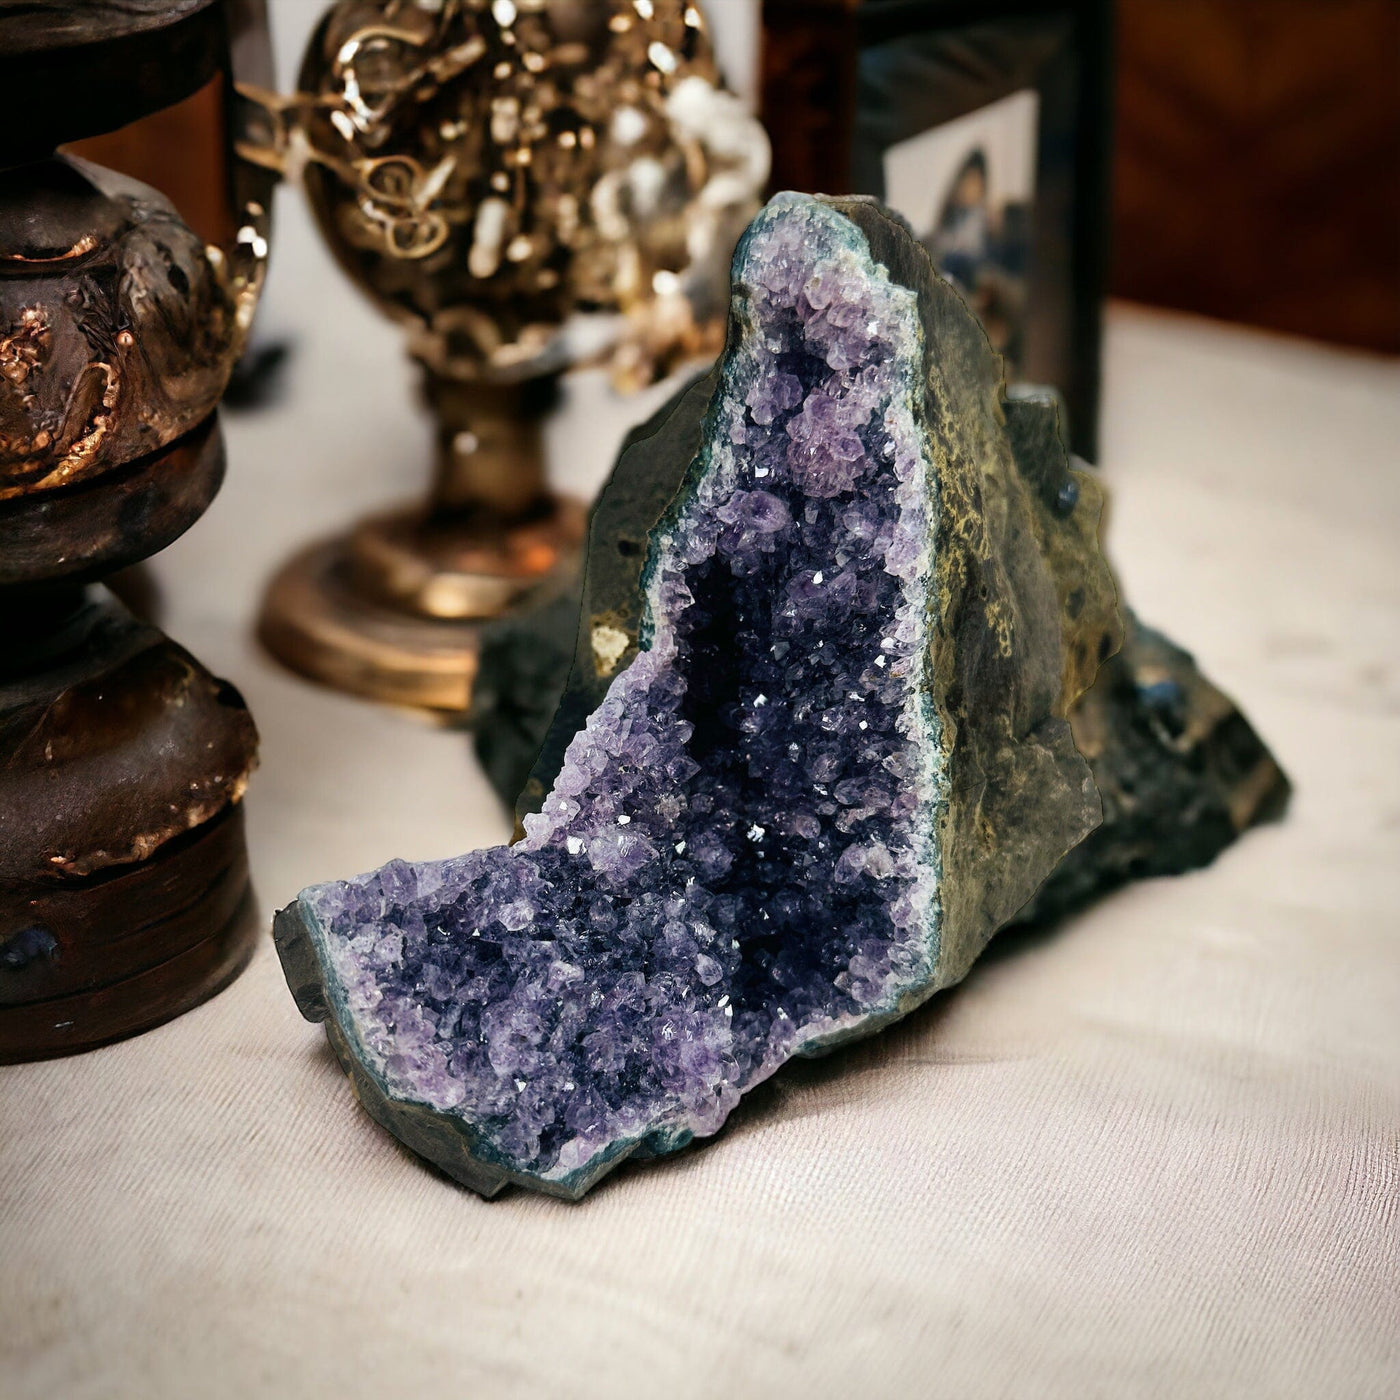  Amethyst Crystal on Matrix - You Choose - Variant B pictured on table next to home decorations